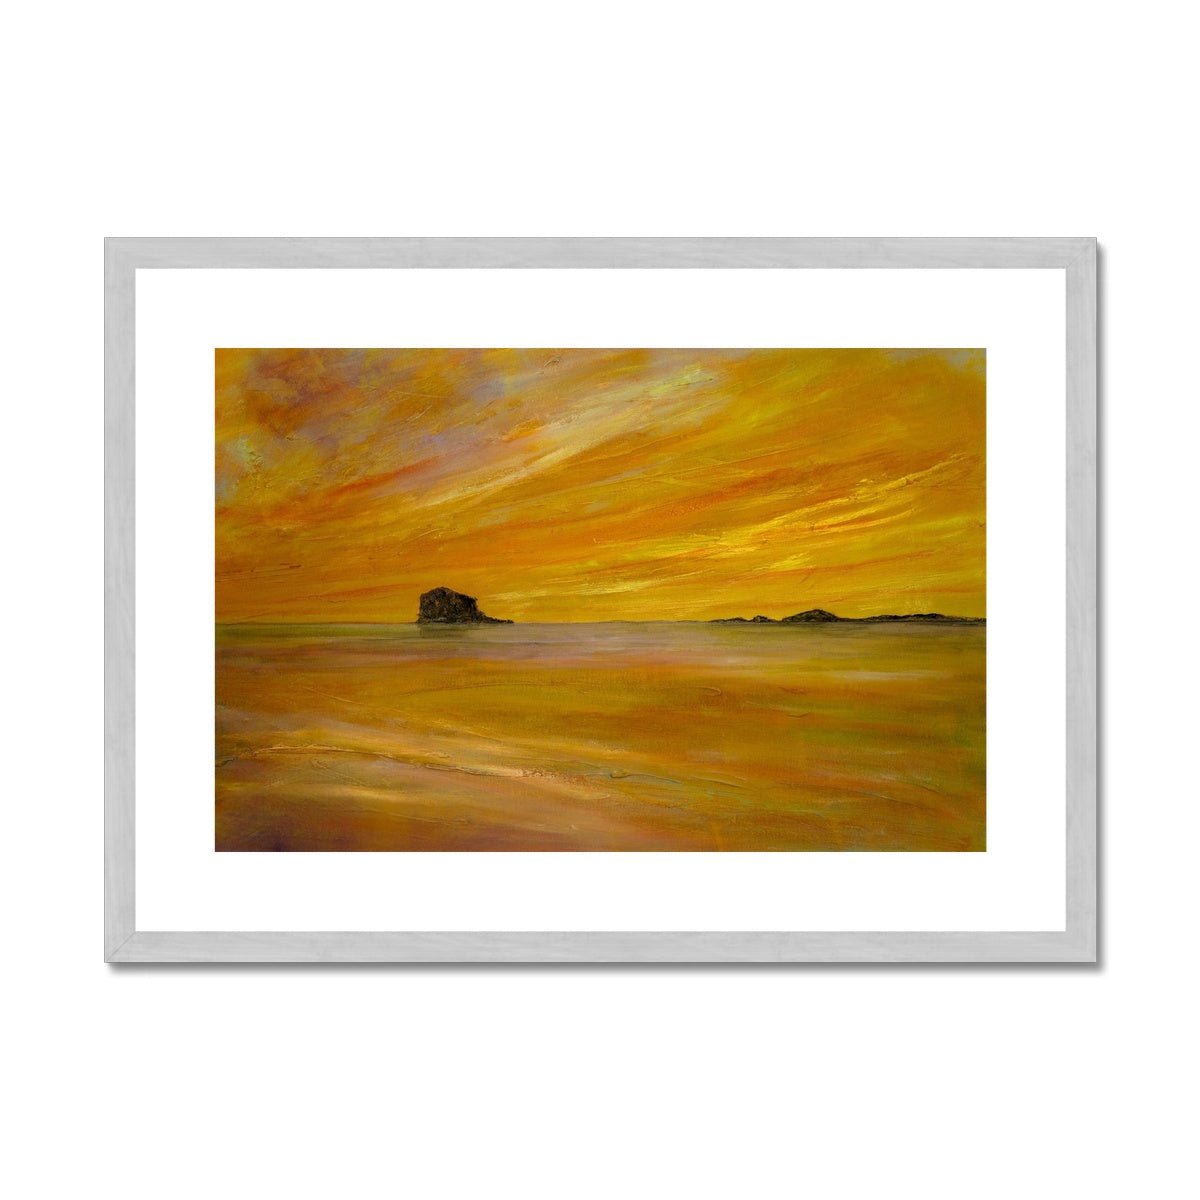 Bass Rock Dusk Painting | Antique Framed & Mounted Prints From Scotland-Antique Framed & Mounted Prints-Edinburgh & Glasgow Art Gallery-A2 Landscape-Silver Frame-Paintings, Prints, Homeware, Art Gifts From Scotland By Scottish Artist Kevin Hunter